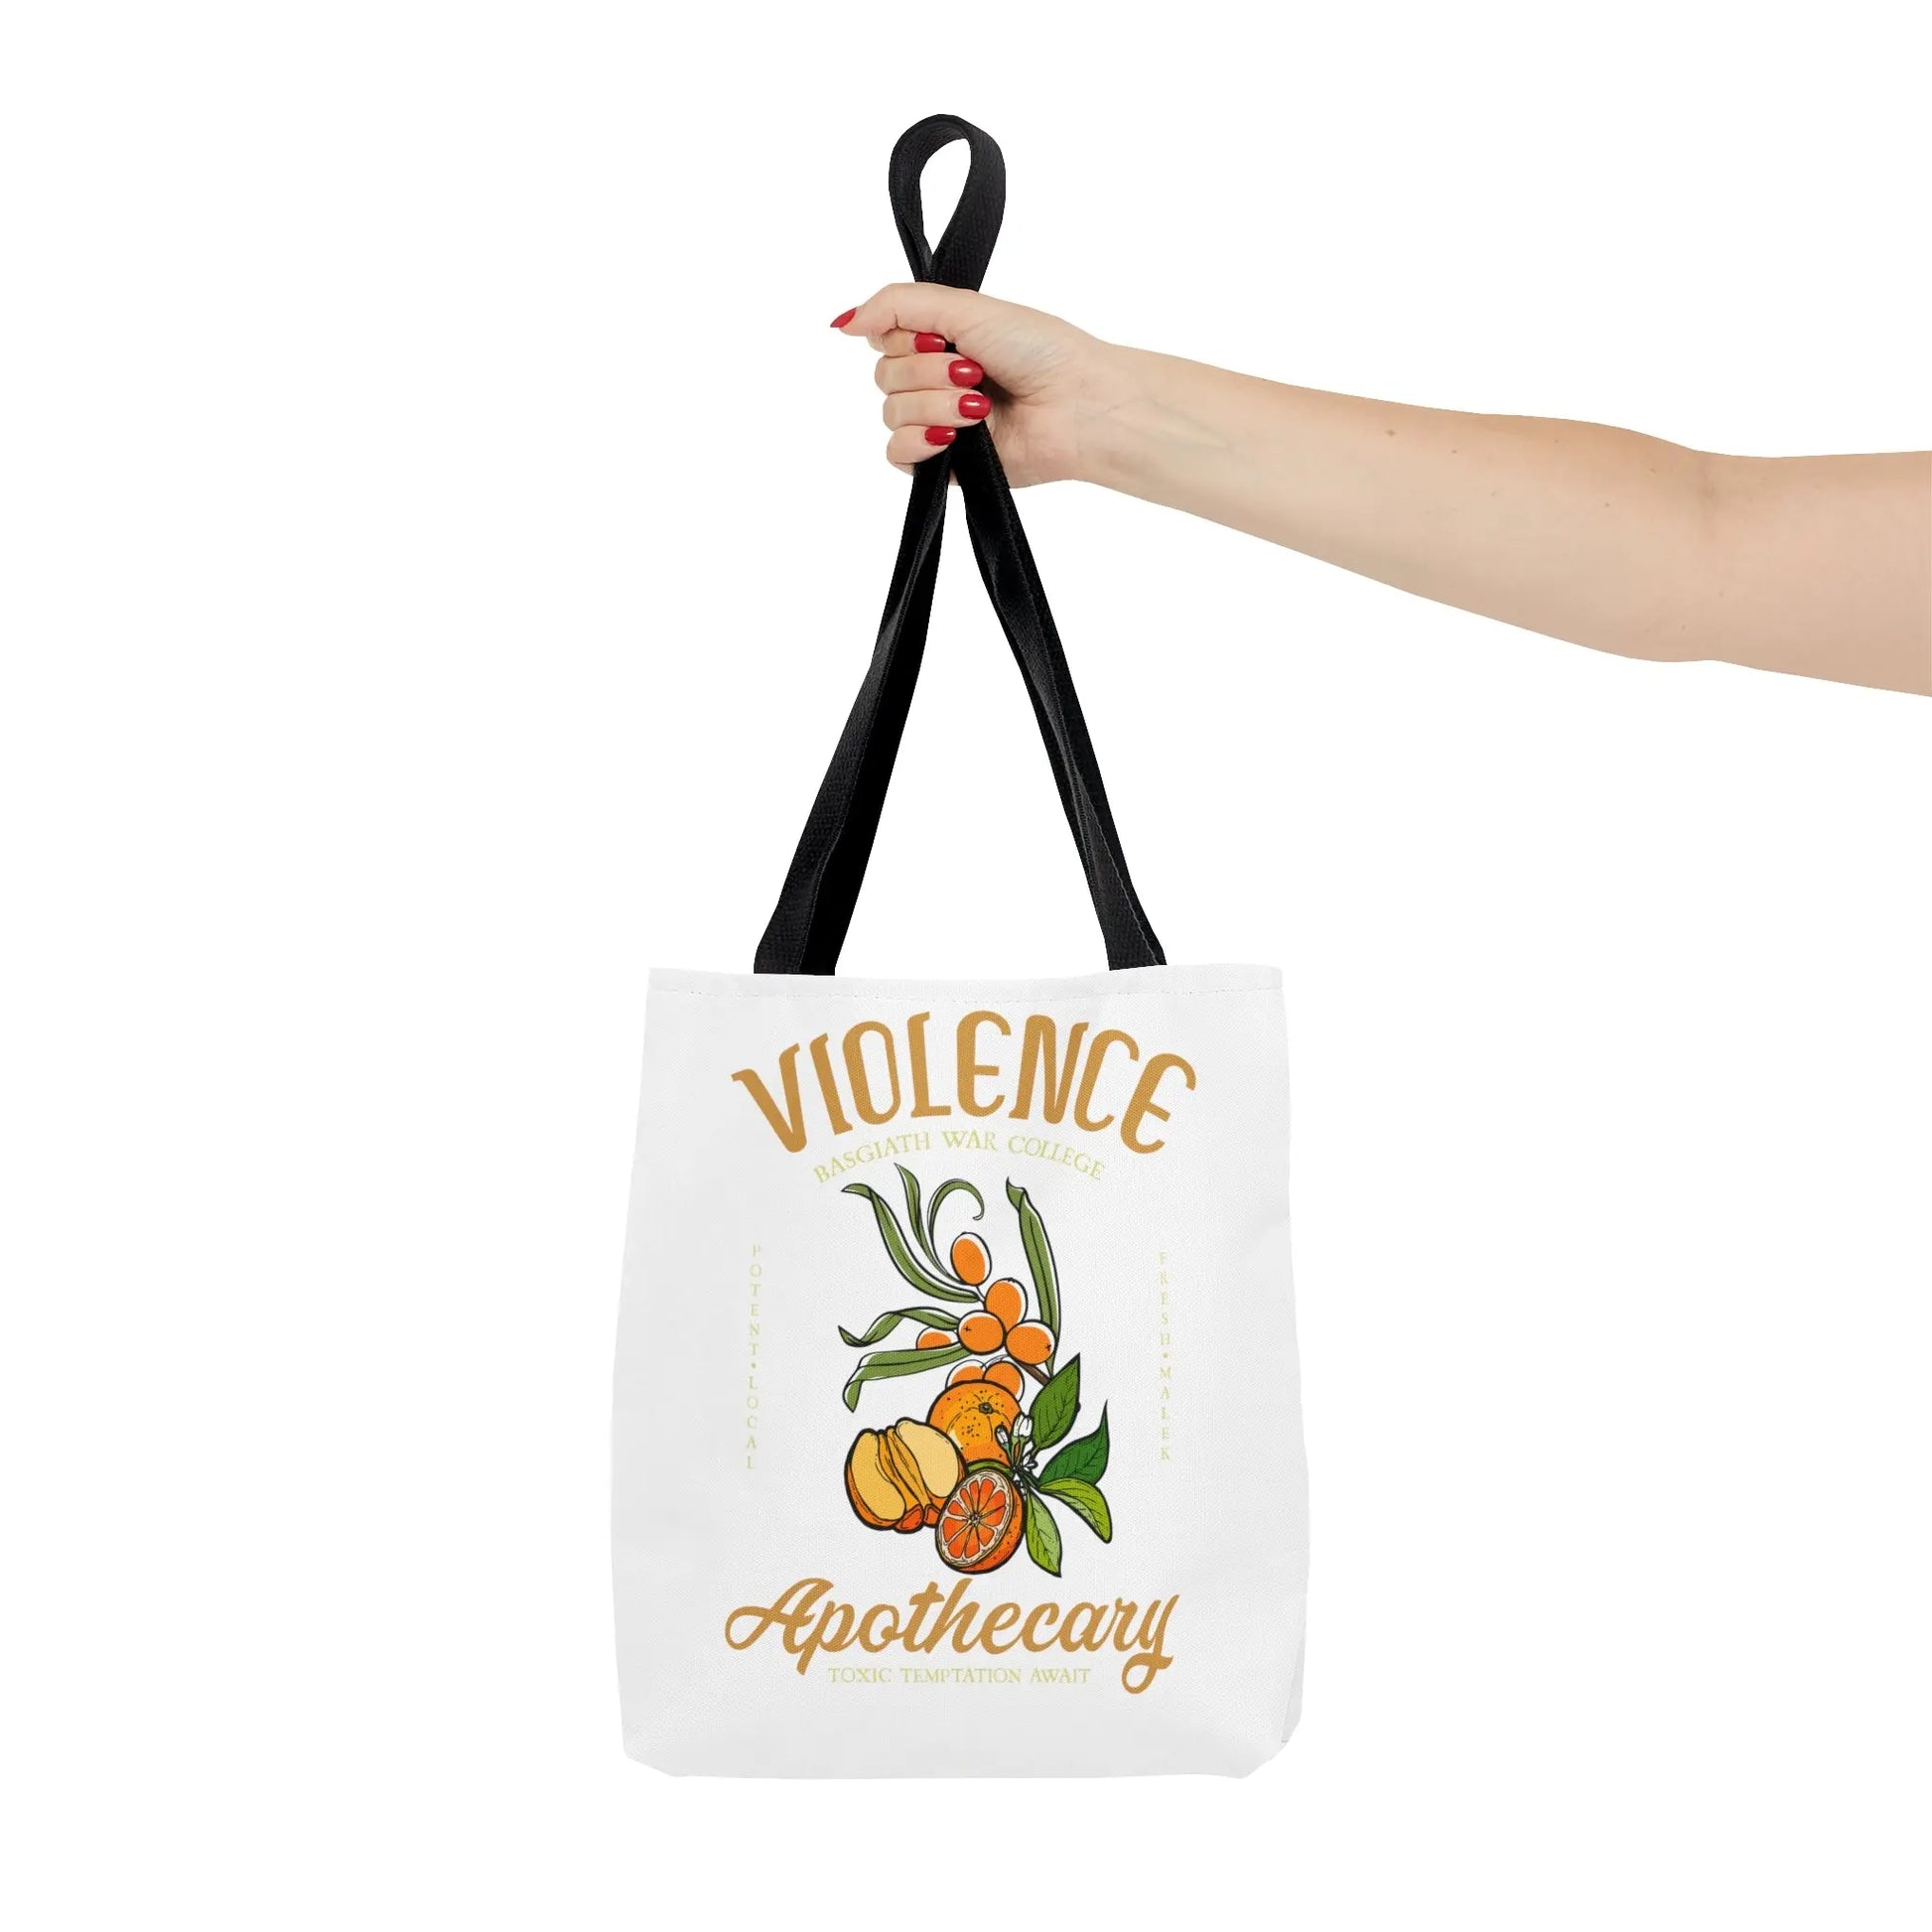 Fourth Wing Iron Flame Vintage-Style Violence Basgiath War College Apothecary Tote Bag | Inspired by Rebecca Yarros - Stay Tomorrow Needs You